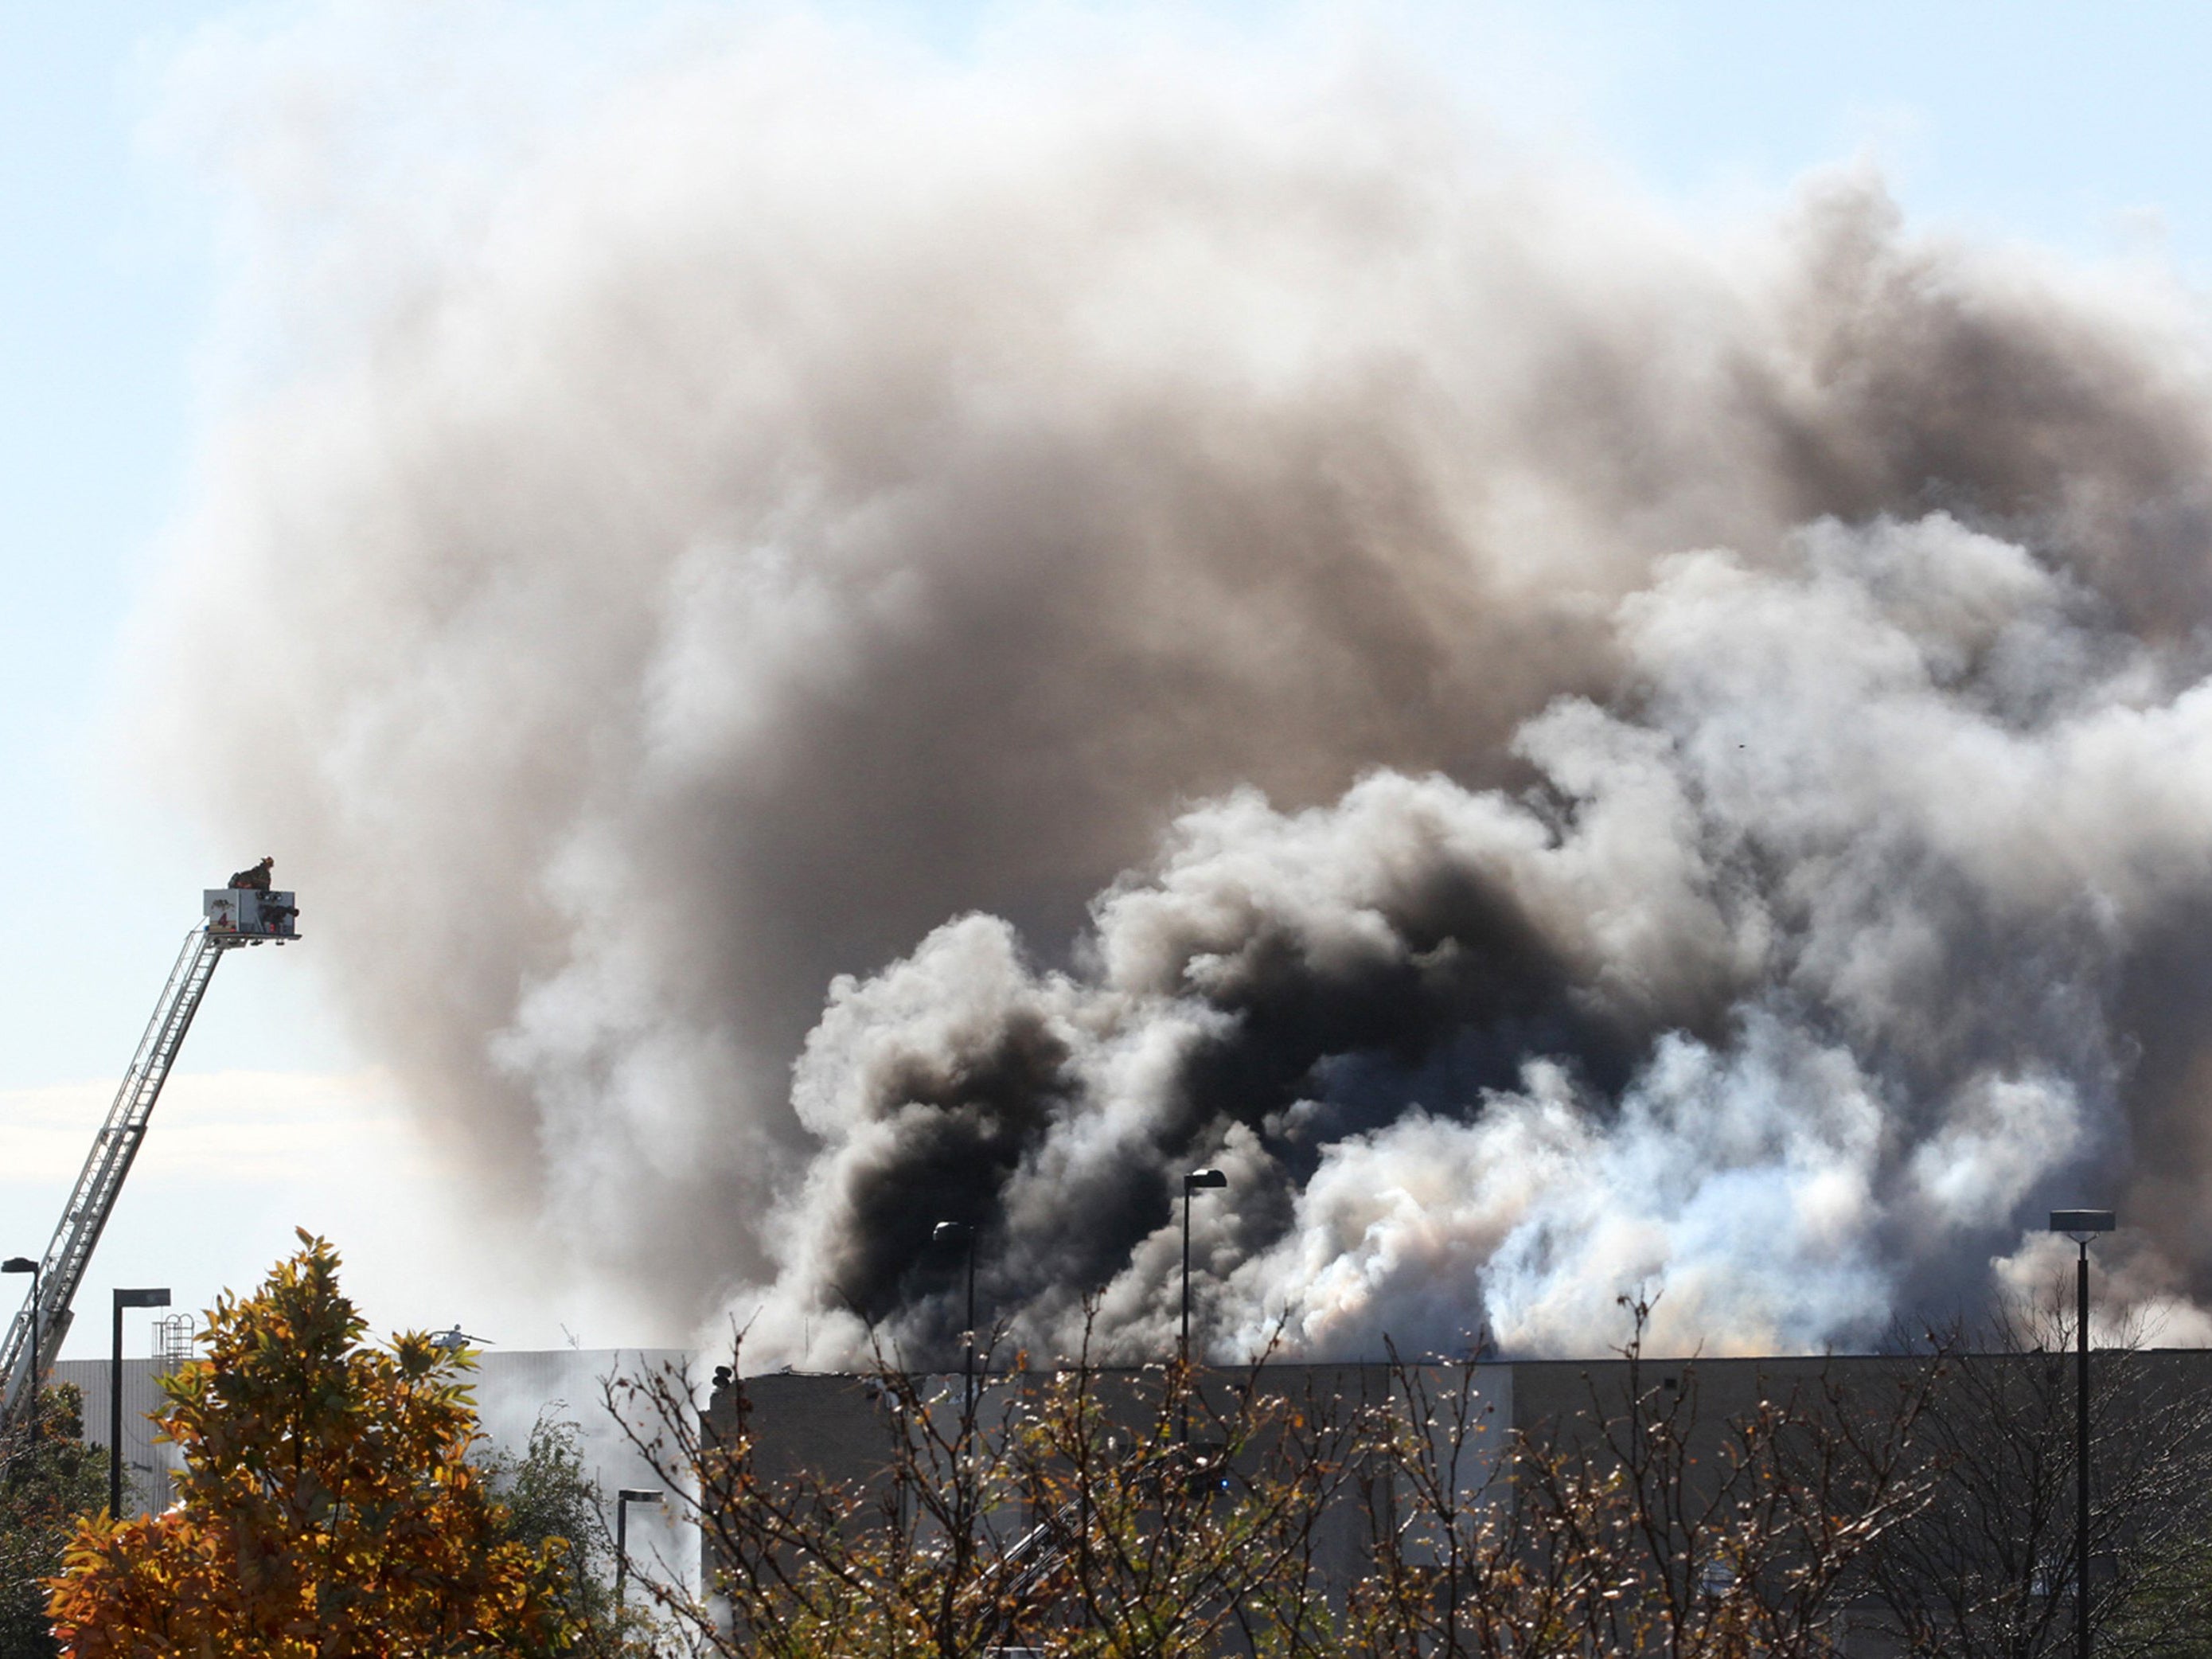 Smoke billows from a building at Mid-Continent airport in Wichita, Kansas, after a small plane crashed into it